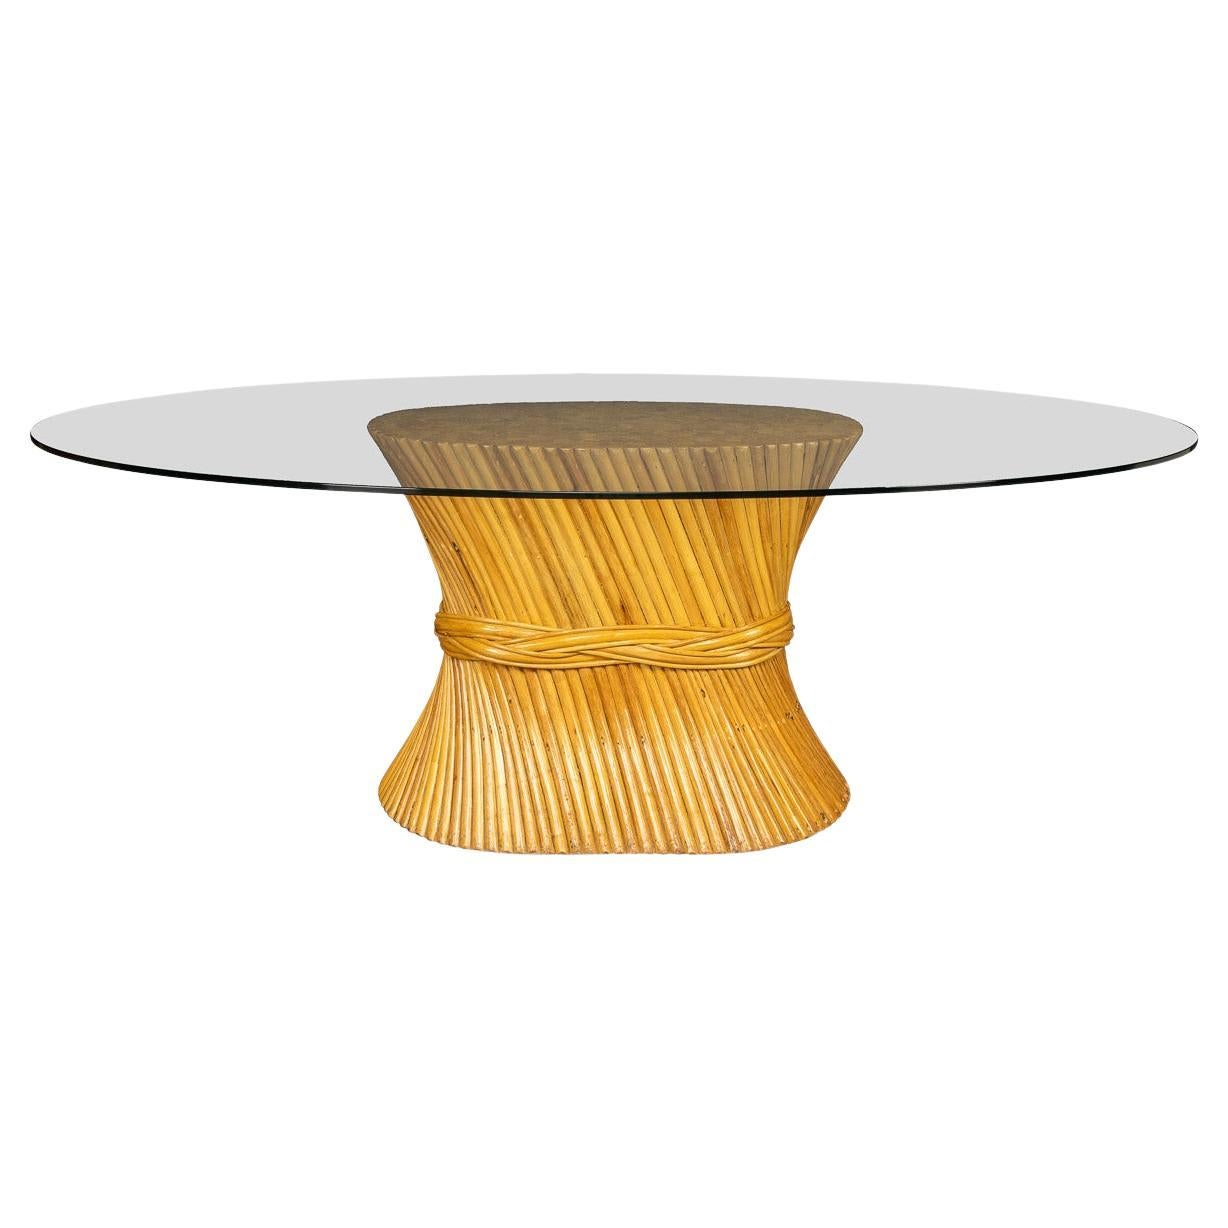 20th Century "Sheaf Of Wheat" Dining Table By Mcguire, c.1970